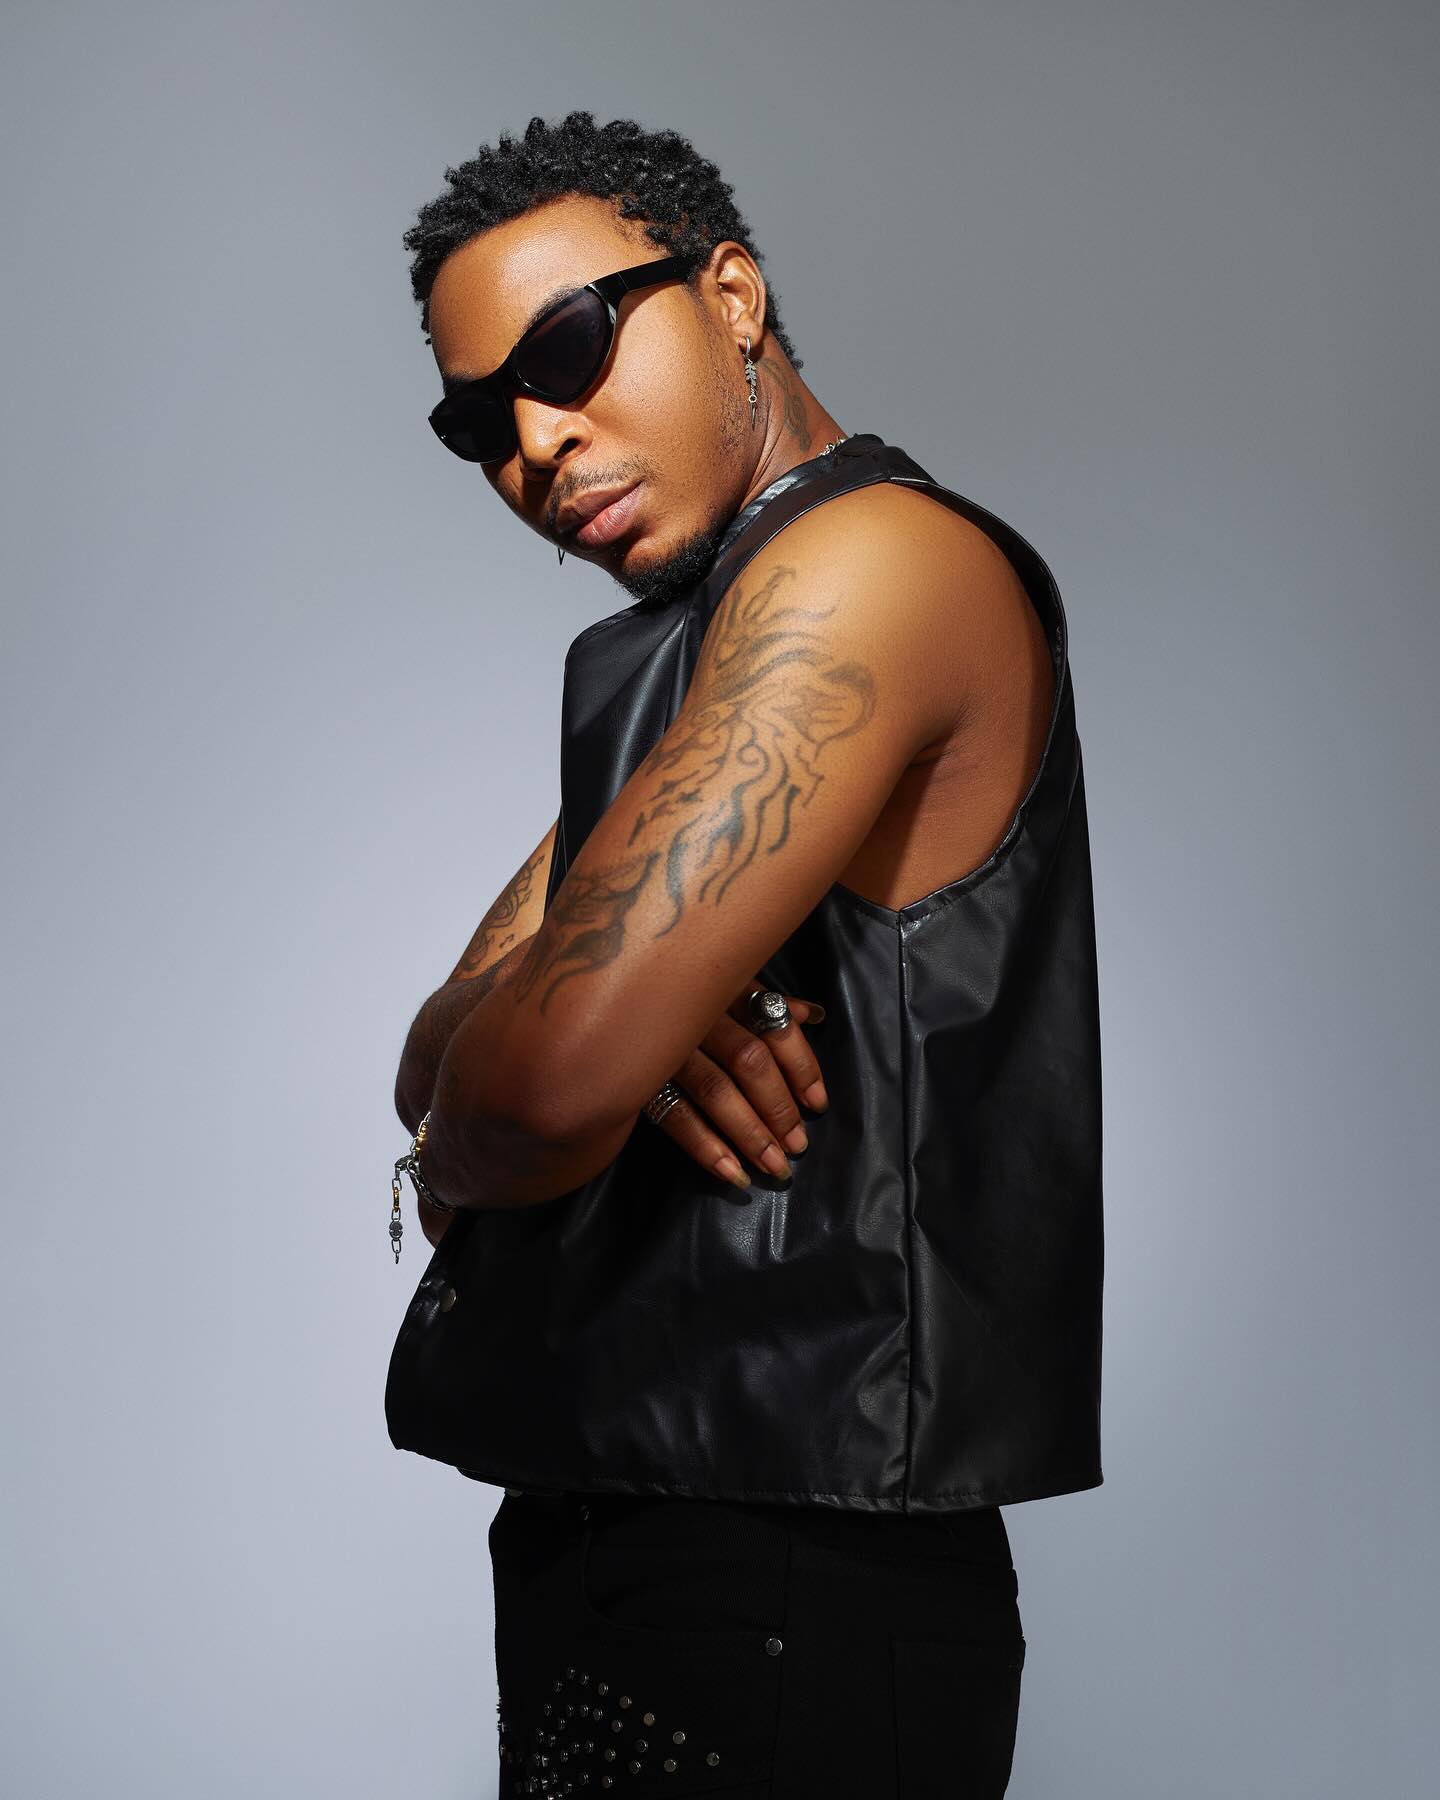 Solidstar shares his raw journey overcoming drug addiction